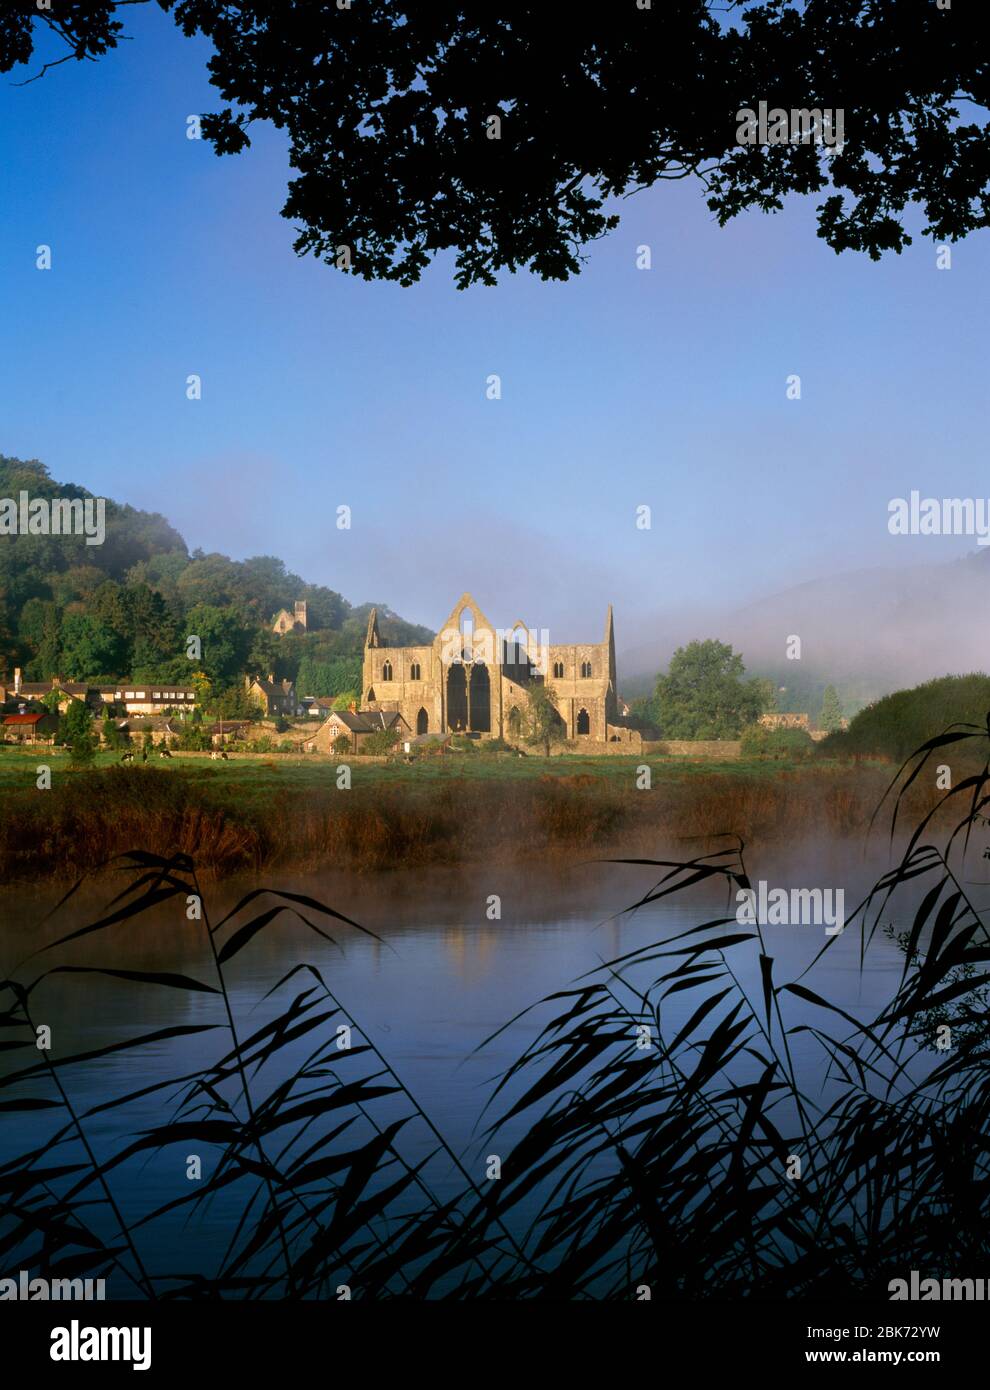 Tintern Abbey beside River Wye, Tintern Pava, Chepstow, Monmouthshire, South Wales. Misty summer morning. Stock Photo